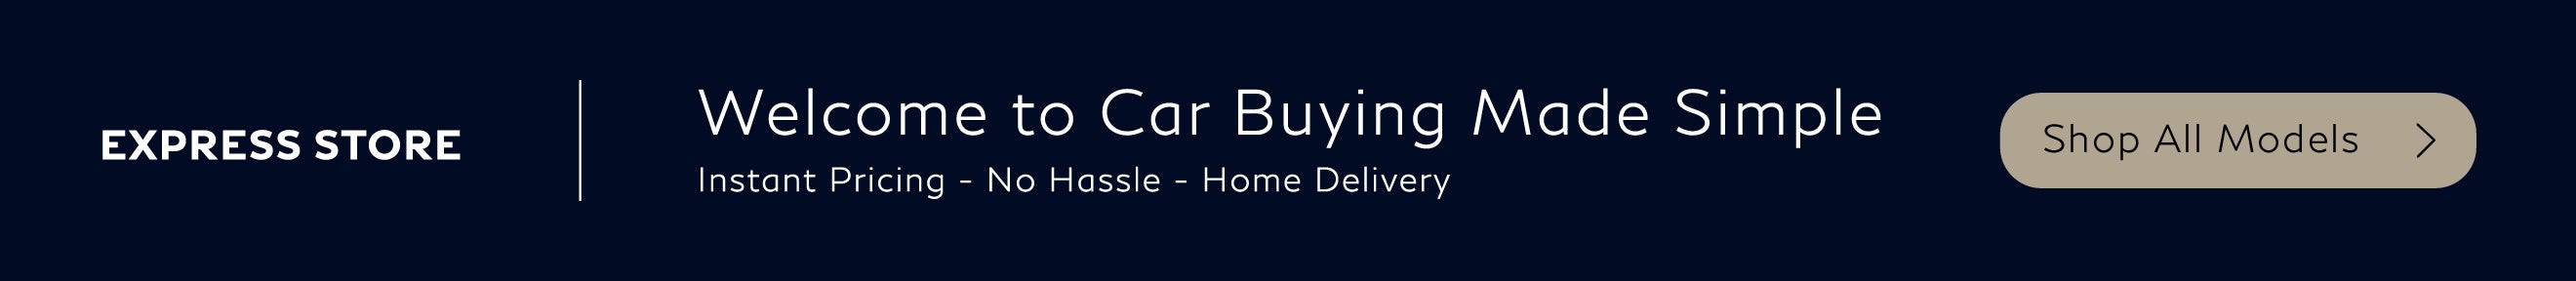 Express Store: Welcome to car buying made simple. Home delivery service available today - anywhere, any time! Click here to shop all models.